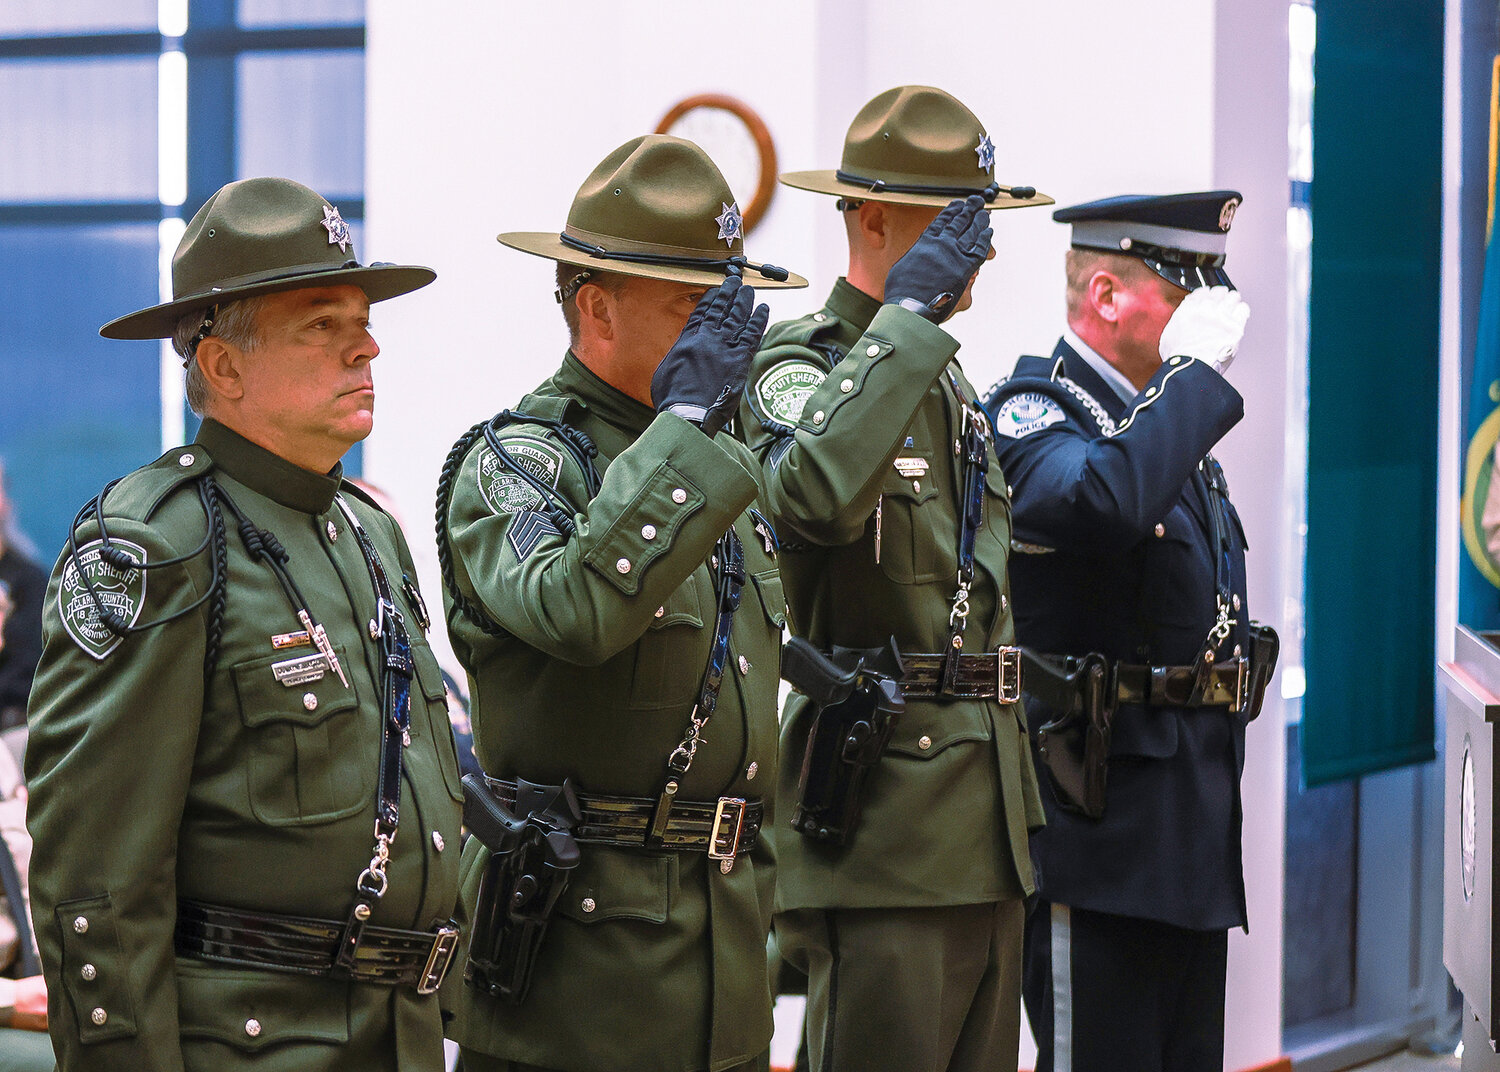 Members of the Clark County Sheriff's Office Honor Guard salute the bell ringers during the bell ceremony of the Clark County Law Enforcement Memorial Ceremony on Thursday, May 18.